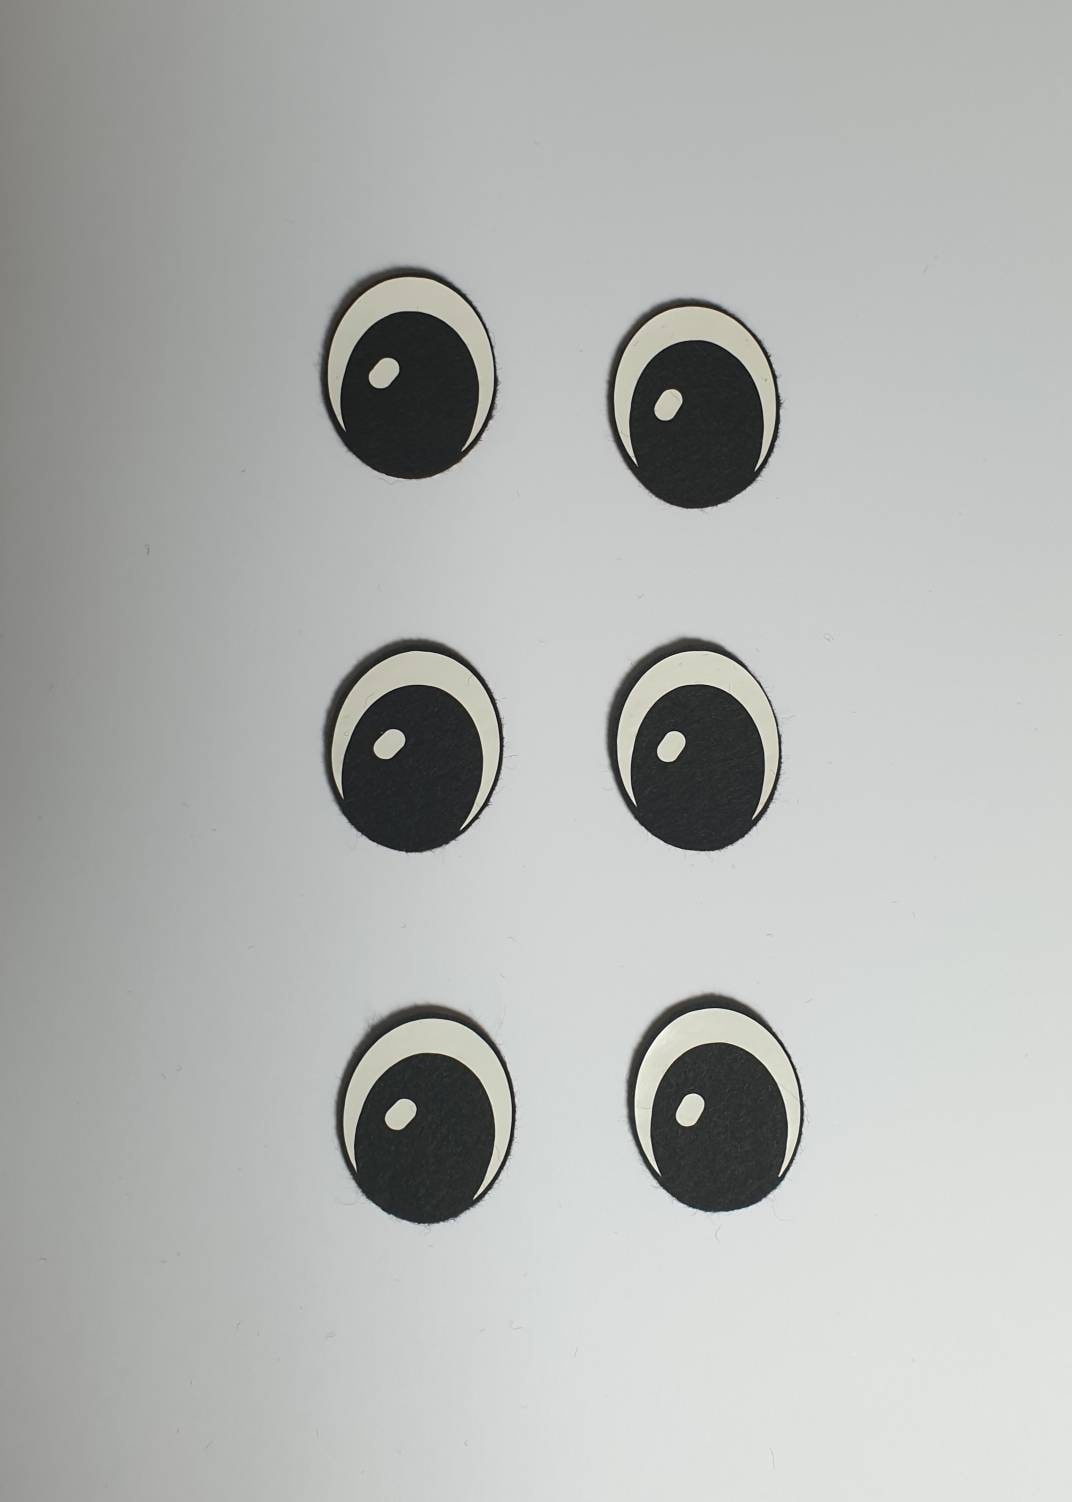 Giant Googly Eyes 40mm Google Large Wiggly Eyes Perfect for Bring Crafts to  Life 60 Wobbly Eyes for Crafts 